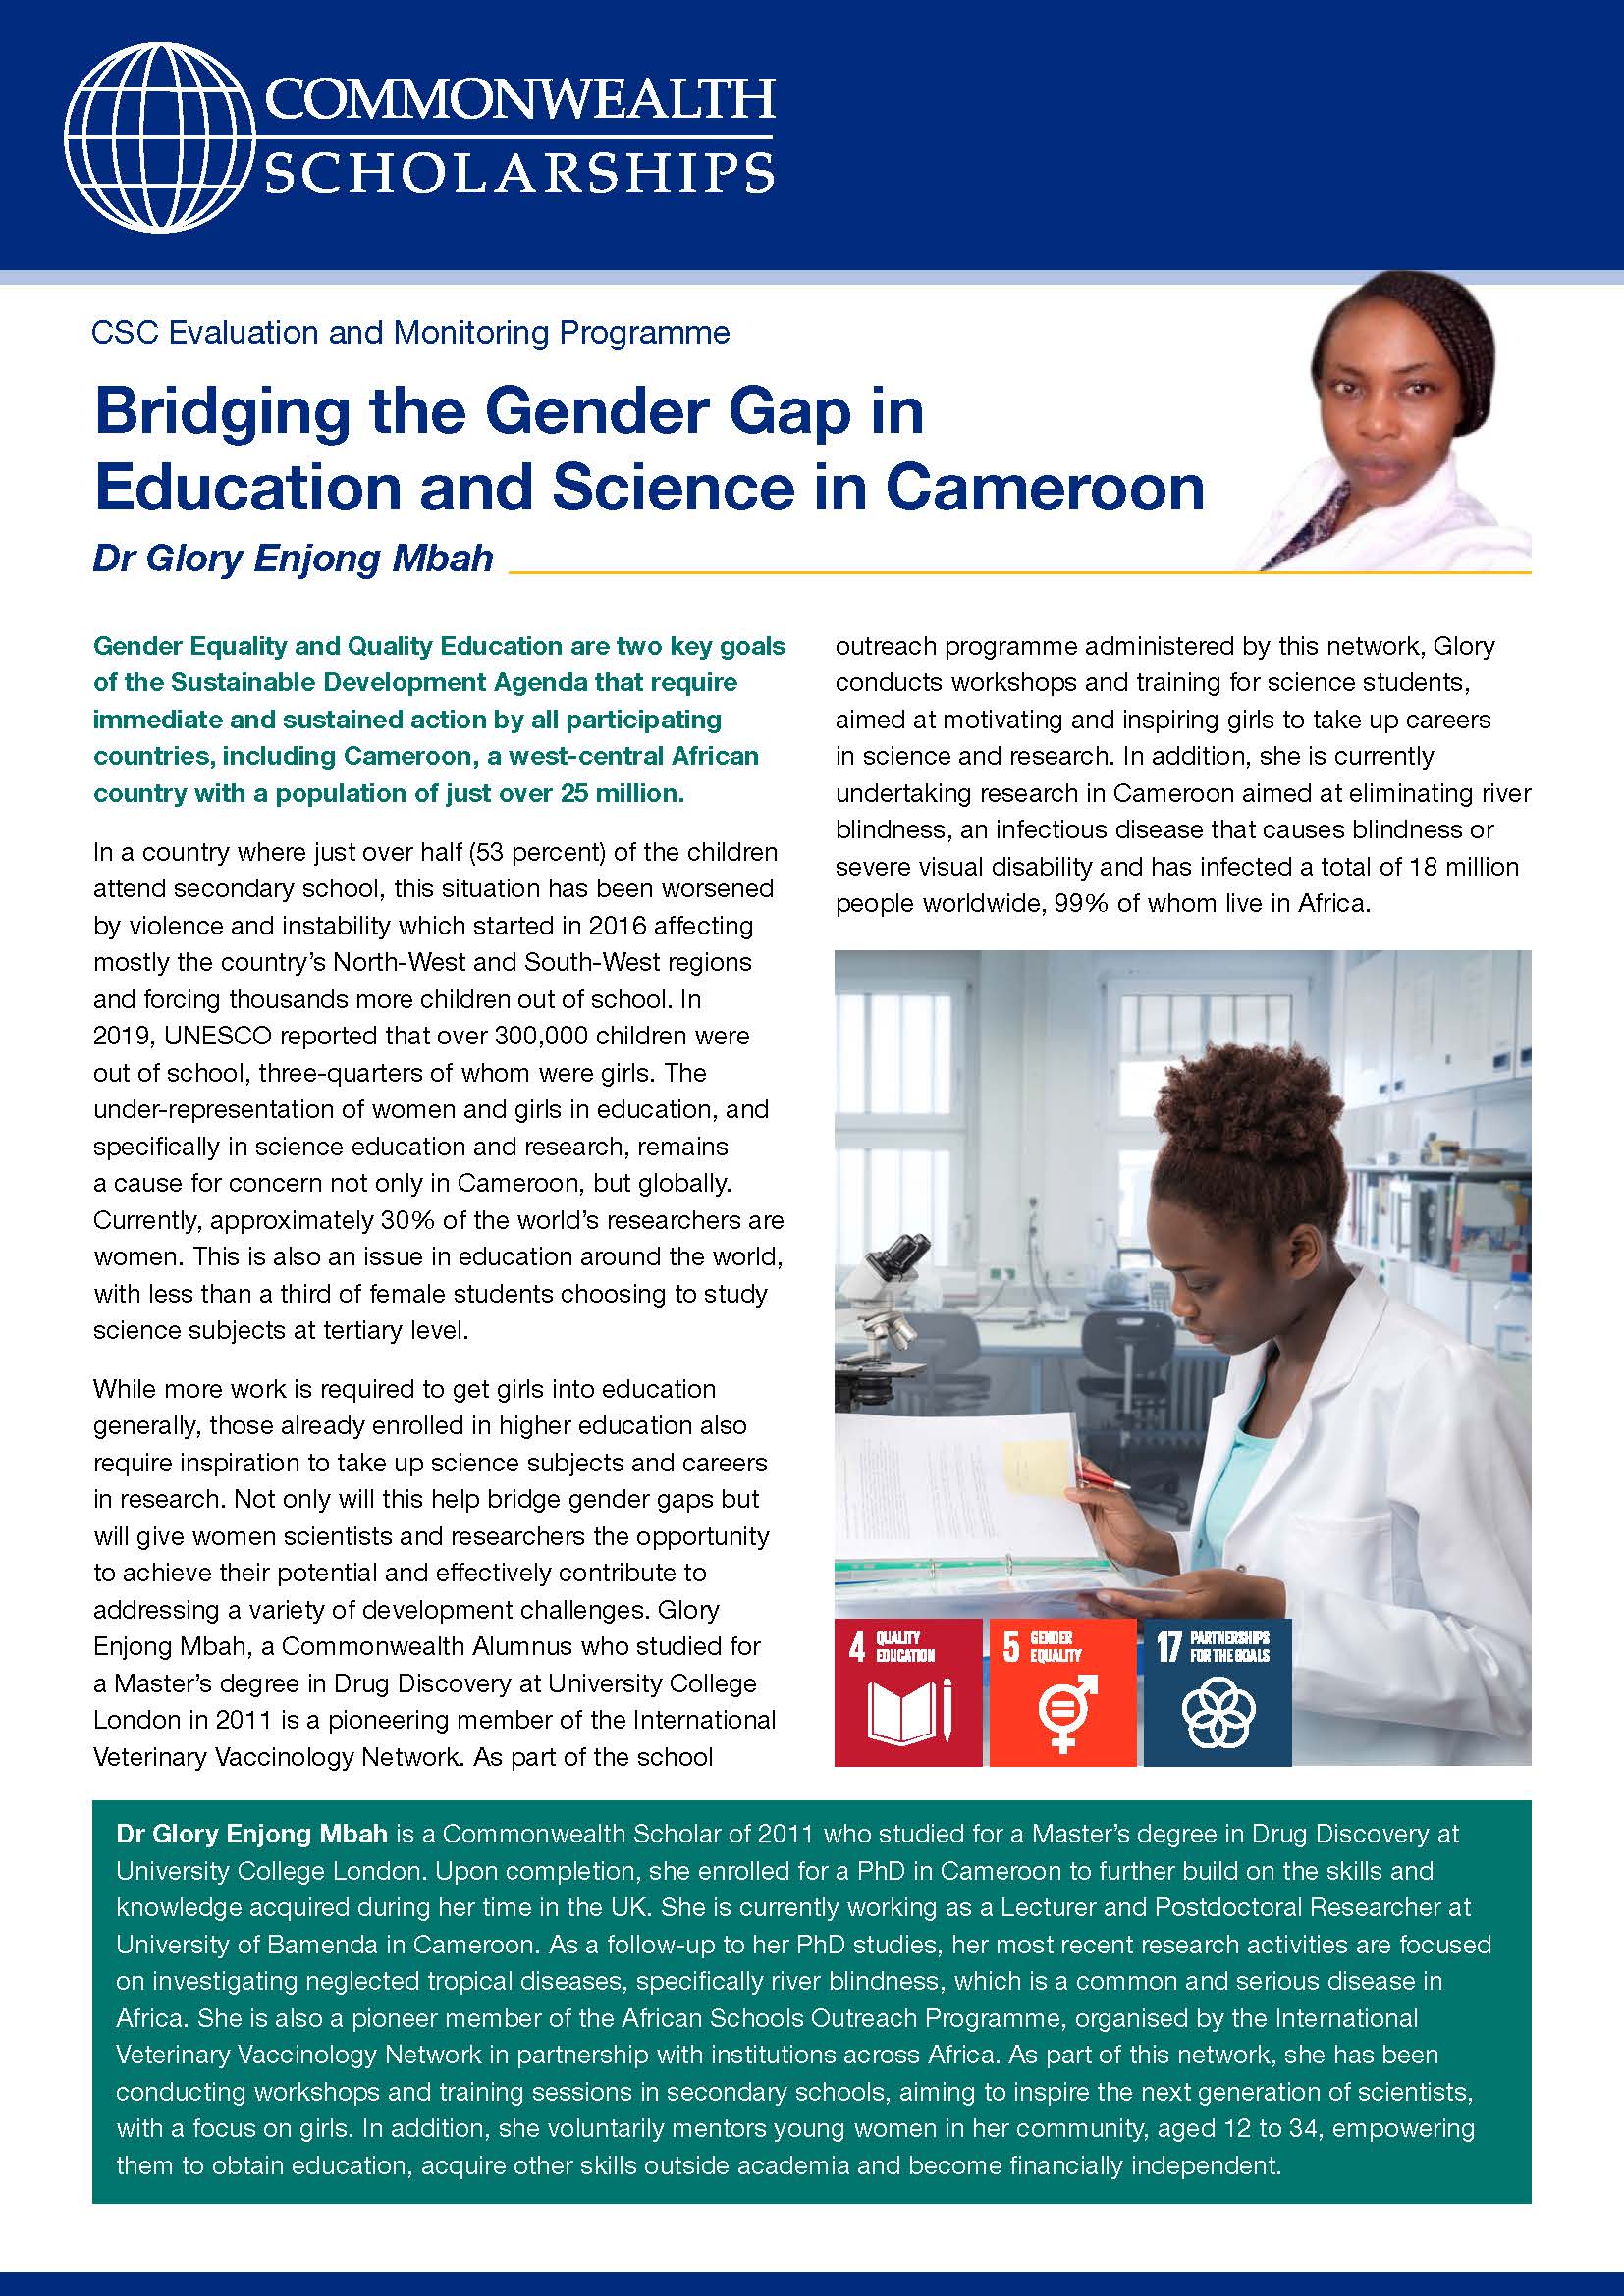 Read the Bridging the Gender Gap in Education and Science in Cameroon case study